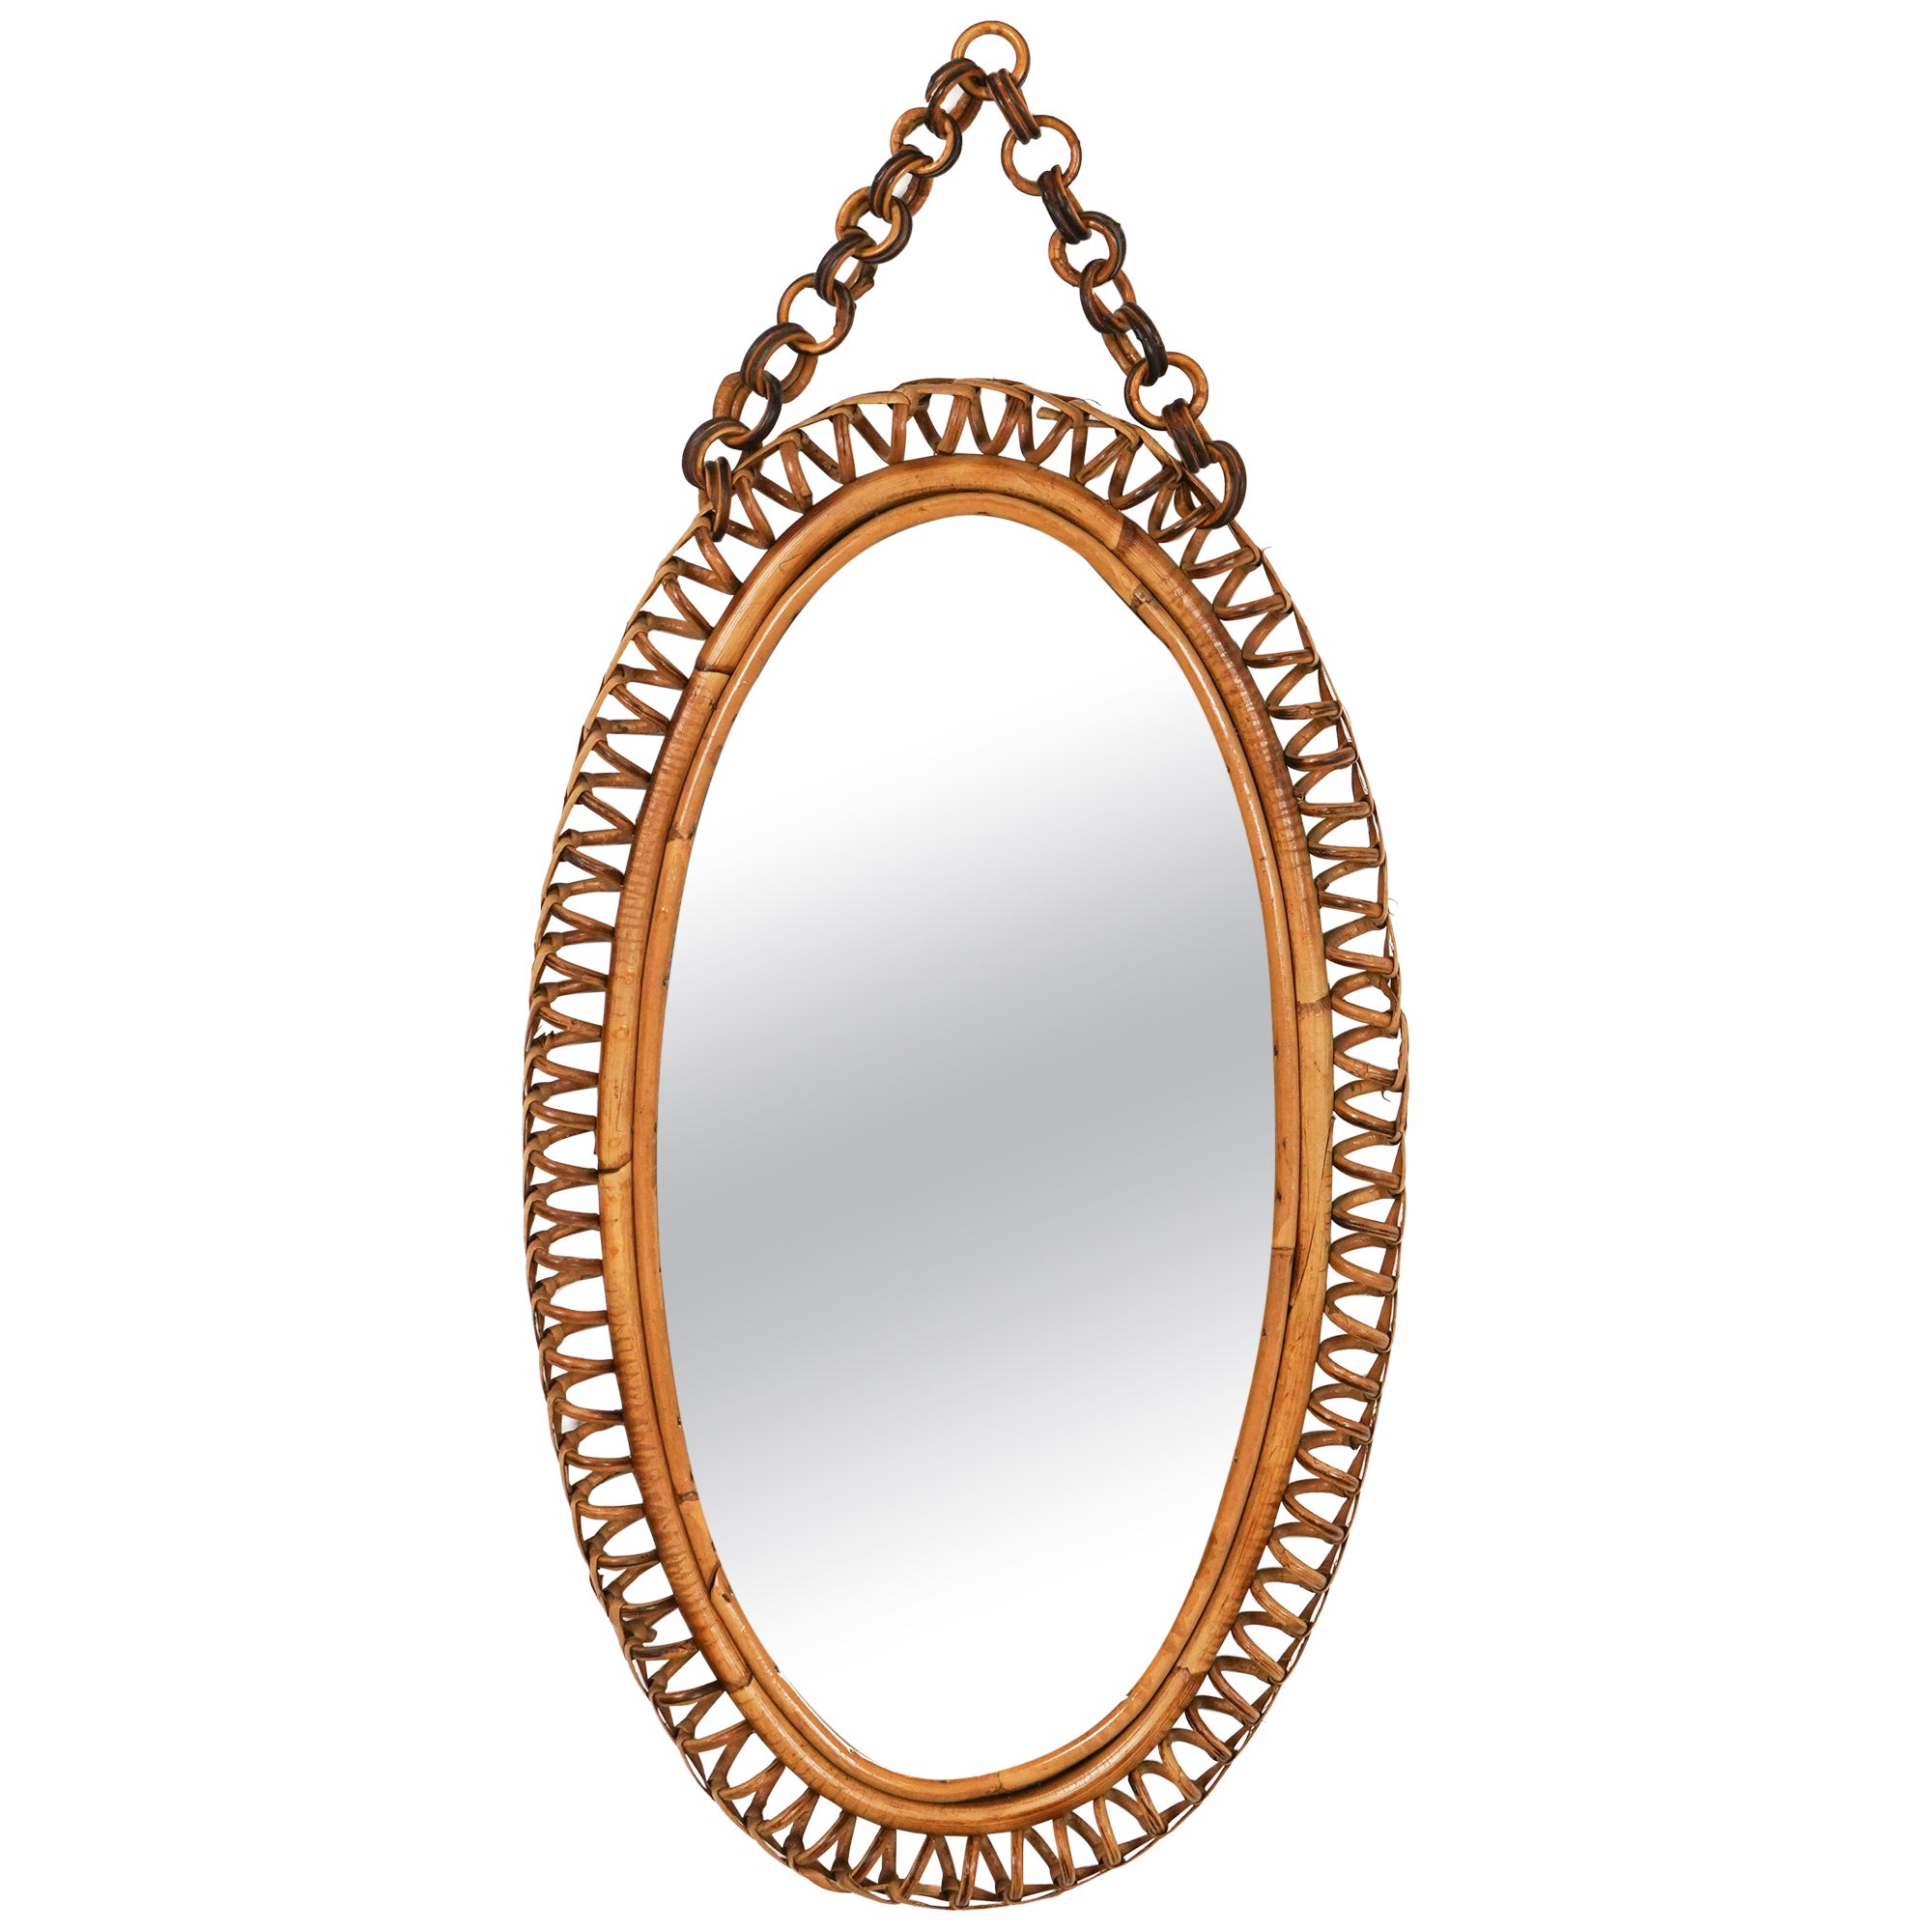 Midcentury Rattan & Bamboo Oval Wall Mirror with Chain, Italy 1960s